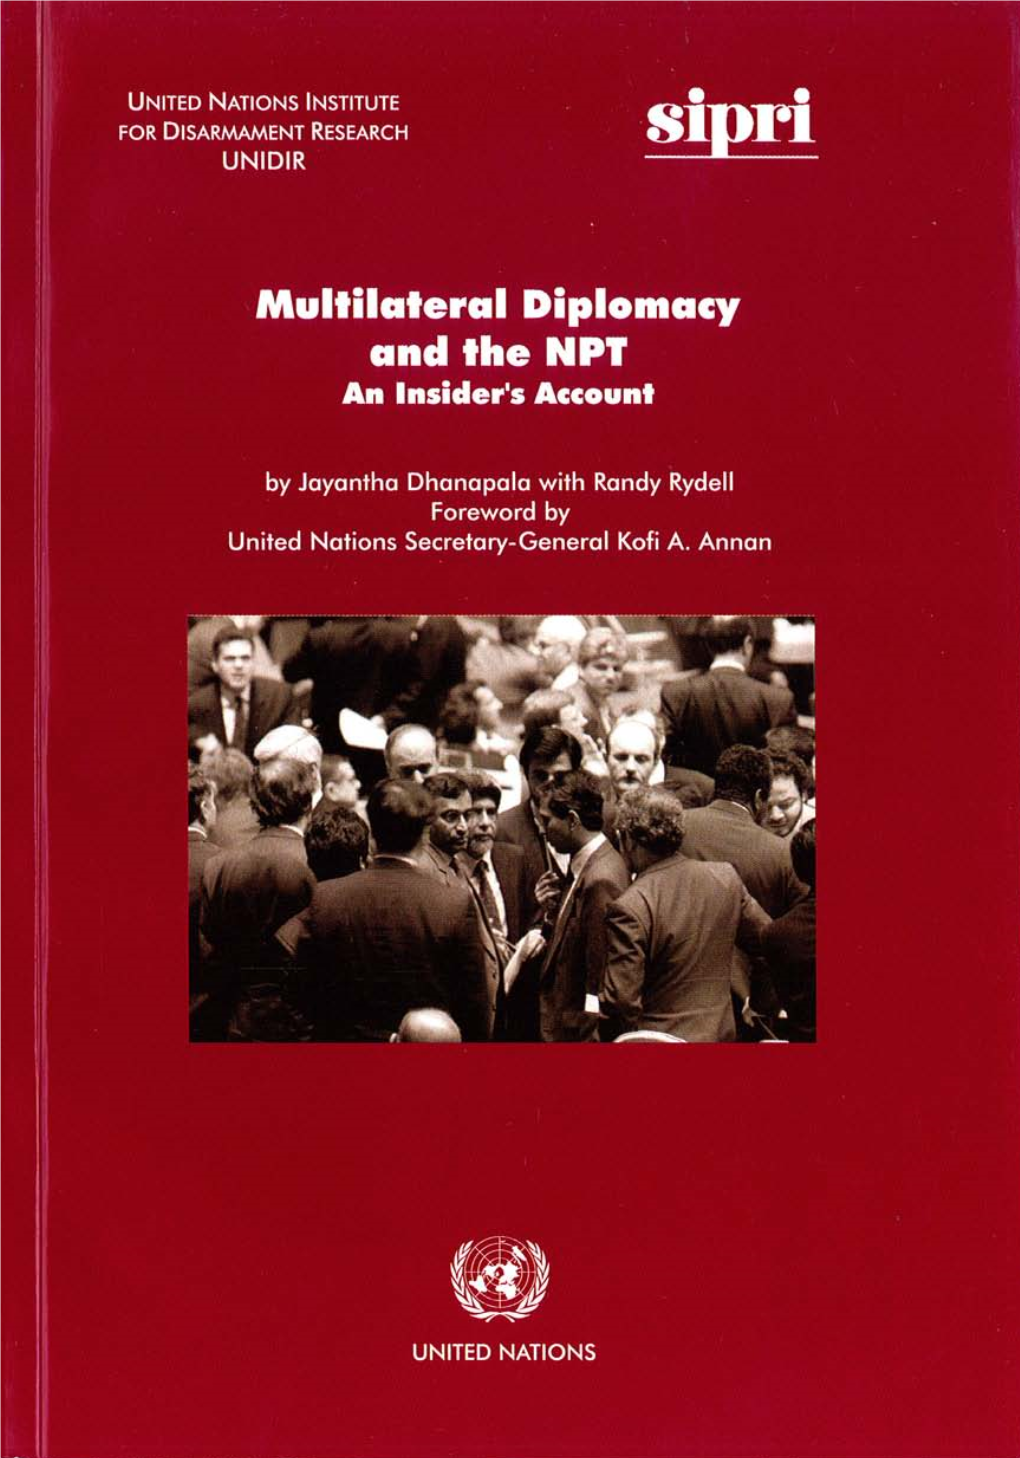 Multilateral Diplomacy and the NPT